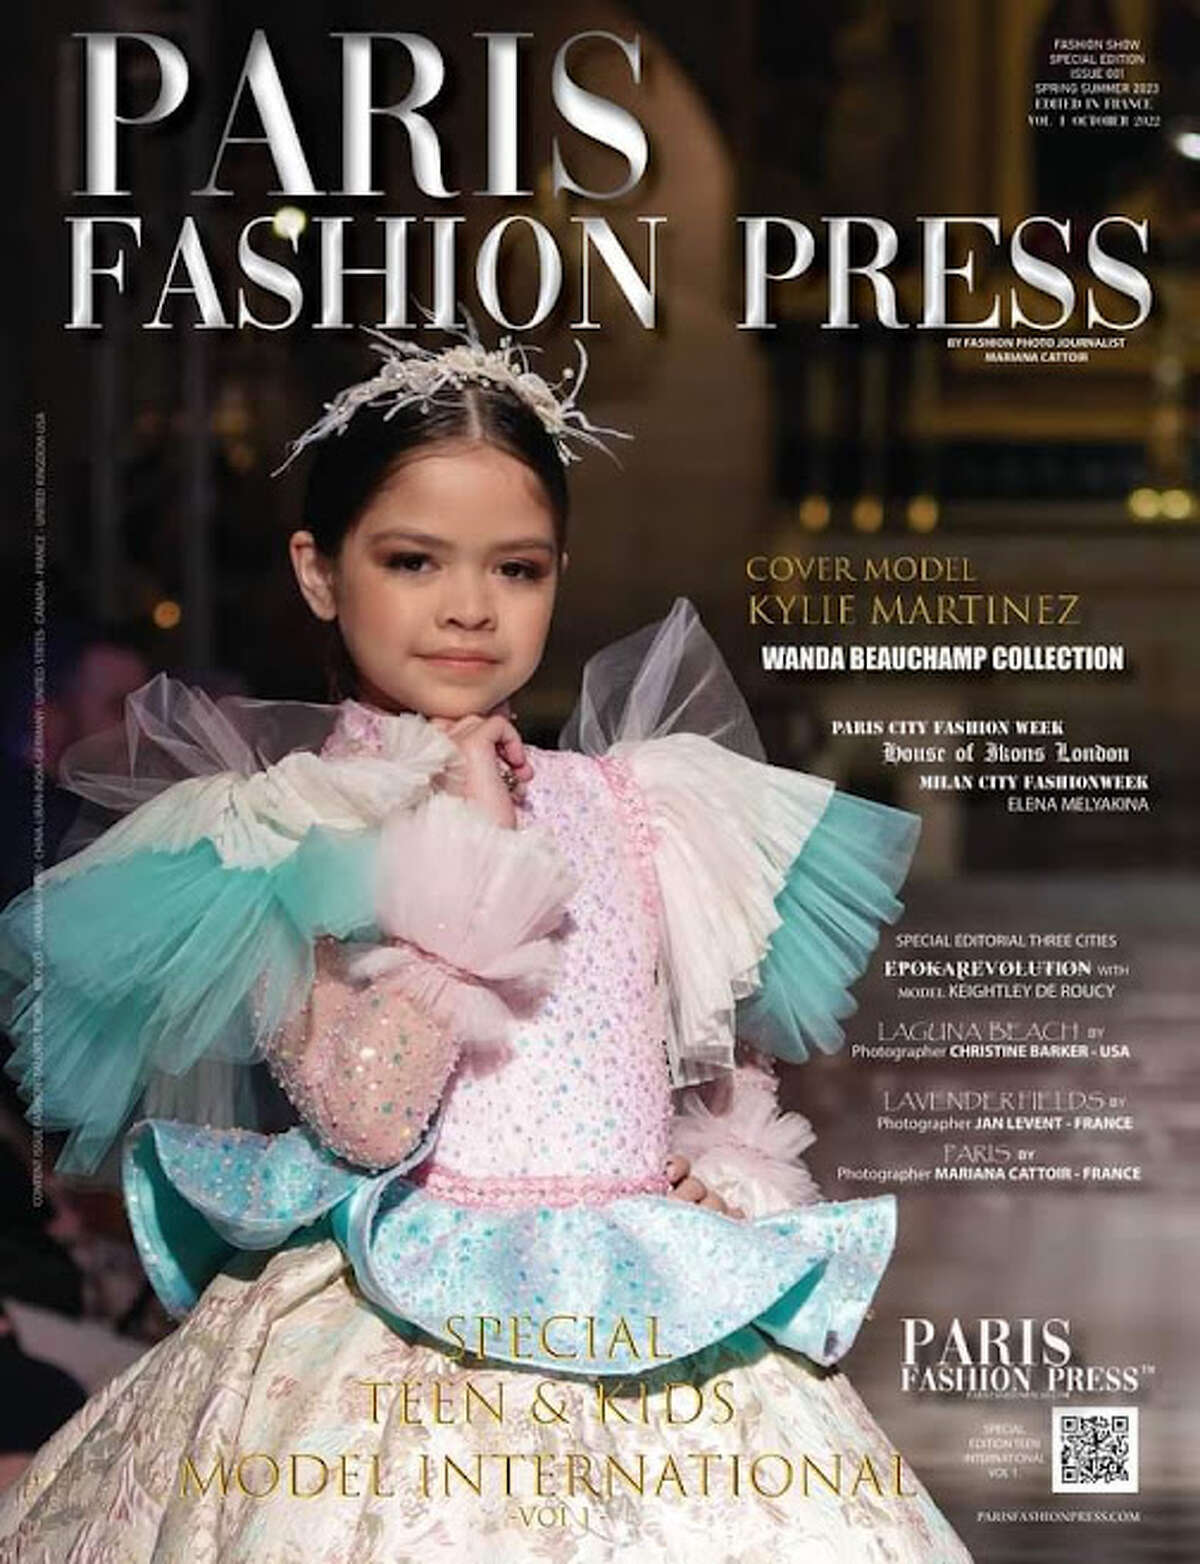 Born and raised in Laredo, Kylie Martinez, who is still in elementary school, has recently become an acclaimed international model as her modeling work has been featured in international runways and magazines from Paris to New York City. In fact, the Paris Fashion Press Magazine honored her with her pictures in the front cover ultimately making the young Laredoan the first ever model in the city to gain international fame for her career. 